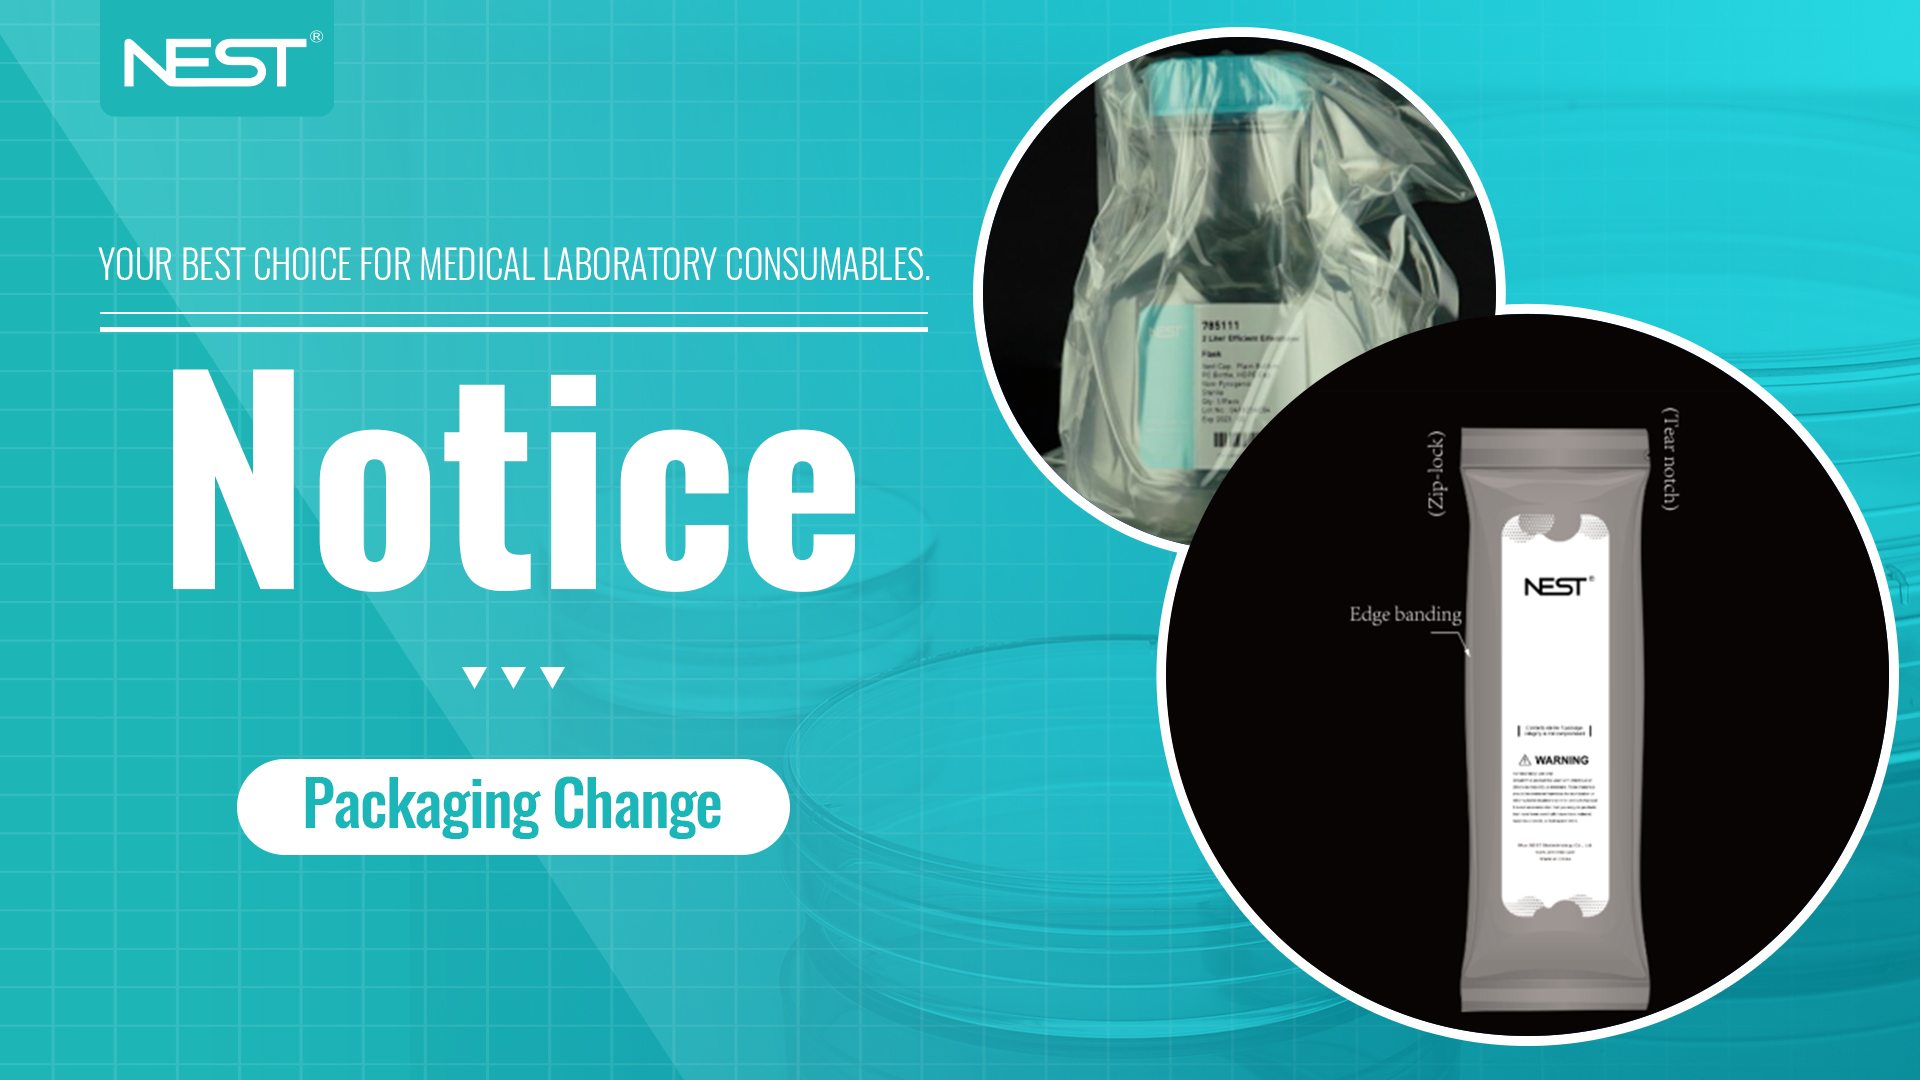 Erlenmeyer Flask and Petri Dish Packaging Changing Notification